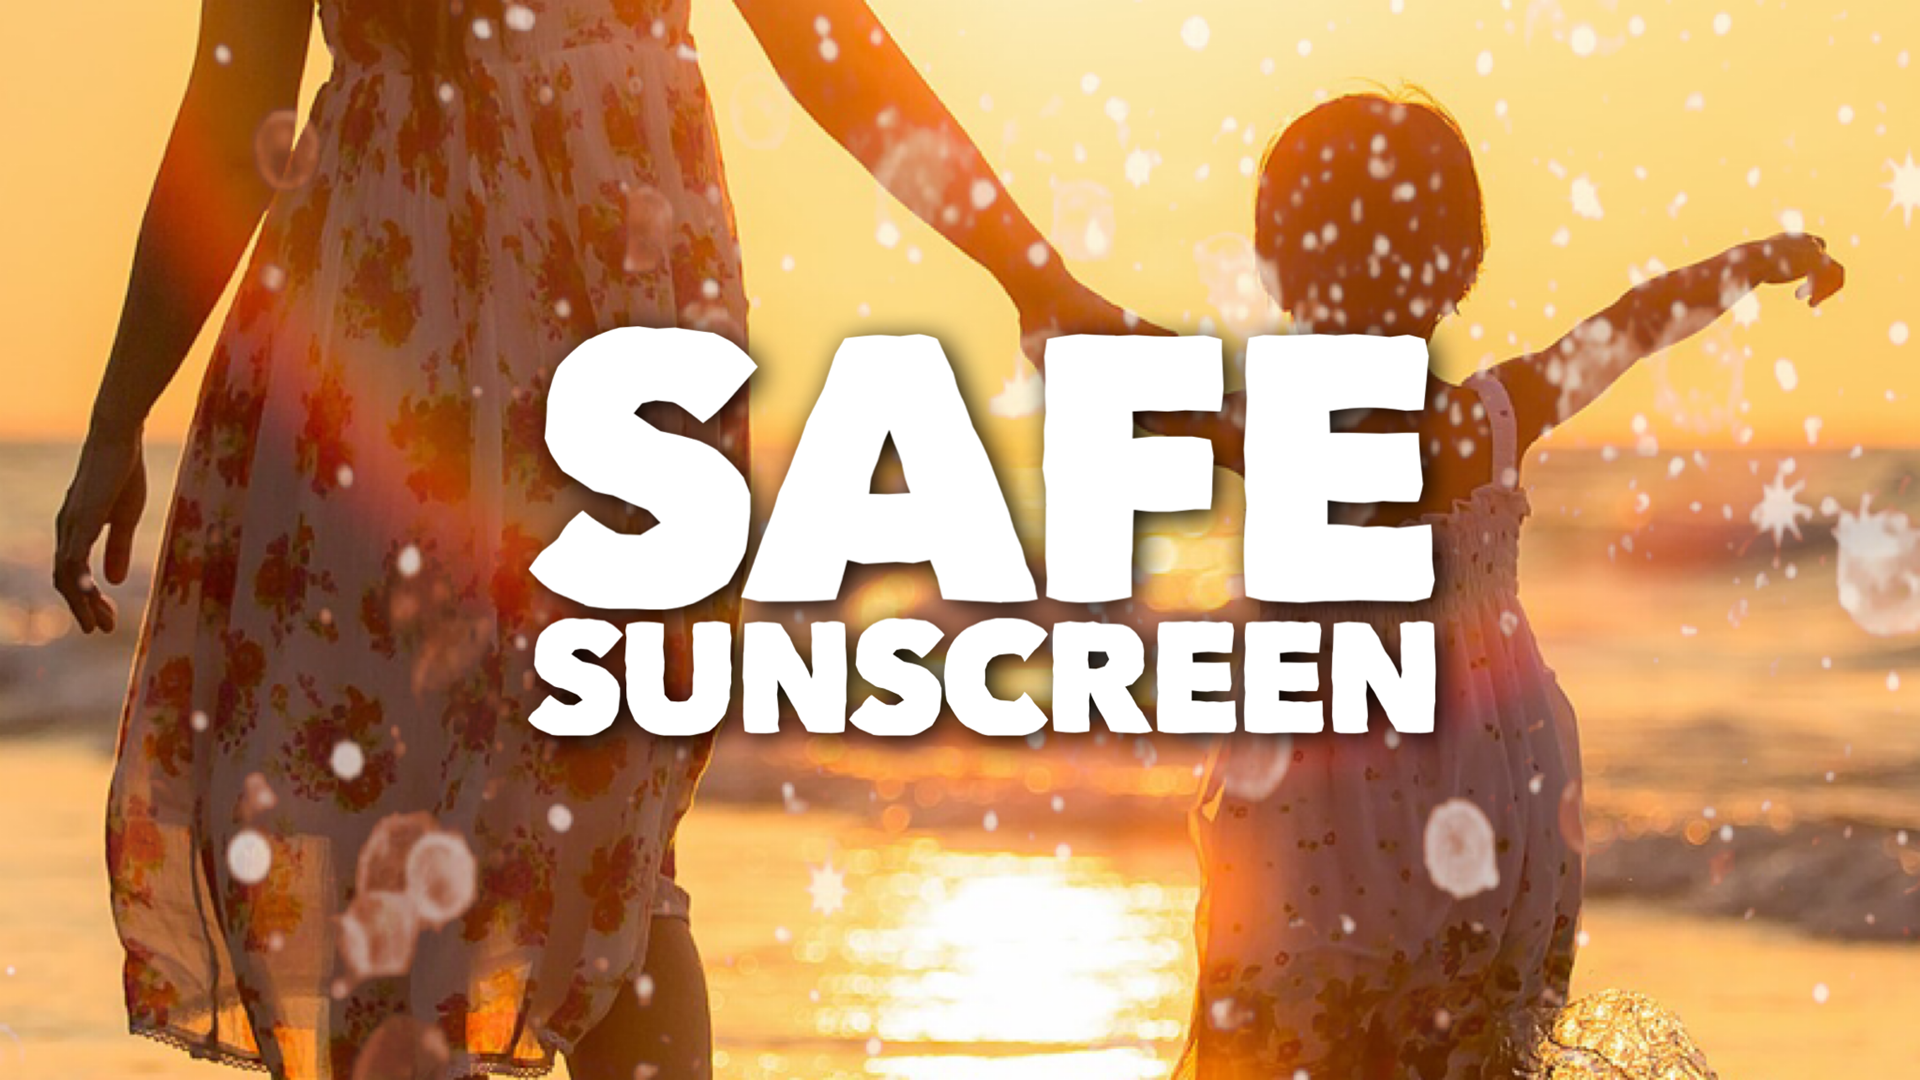 Recently, the government proposed new regulations challenging the safety of common sunscreen ingredients. So, are some sunscreens safer than others?